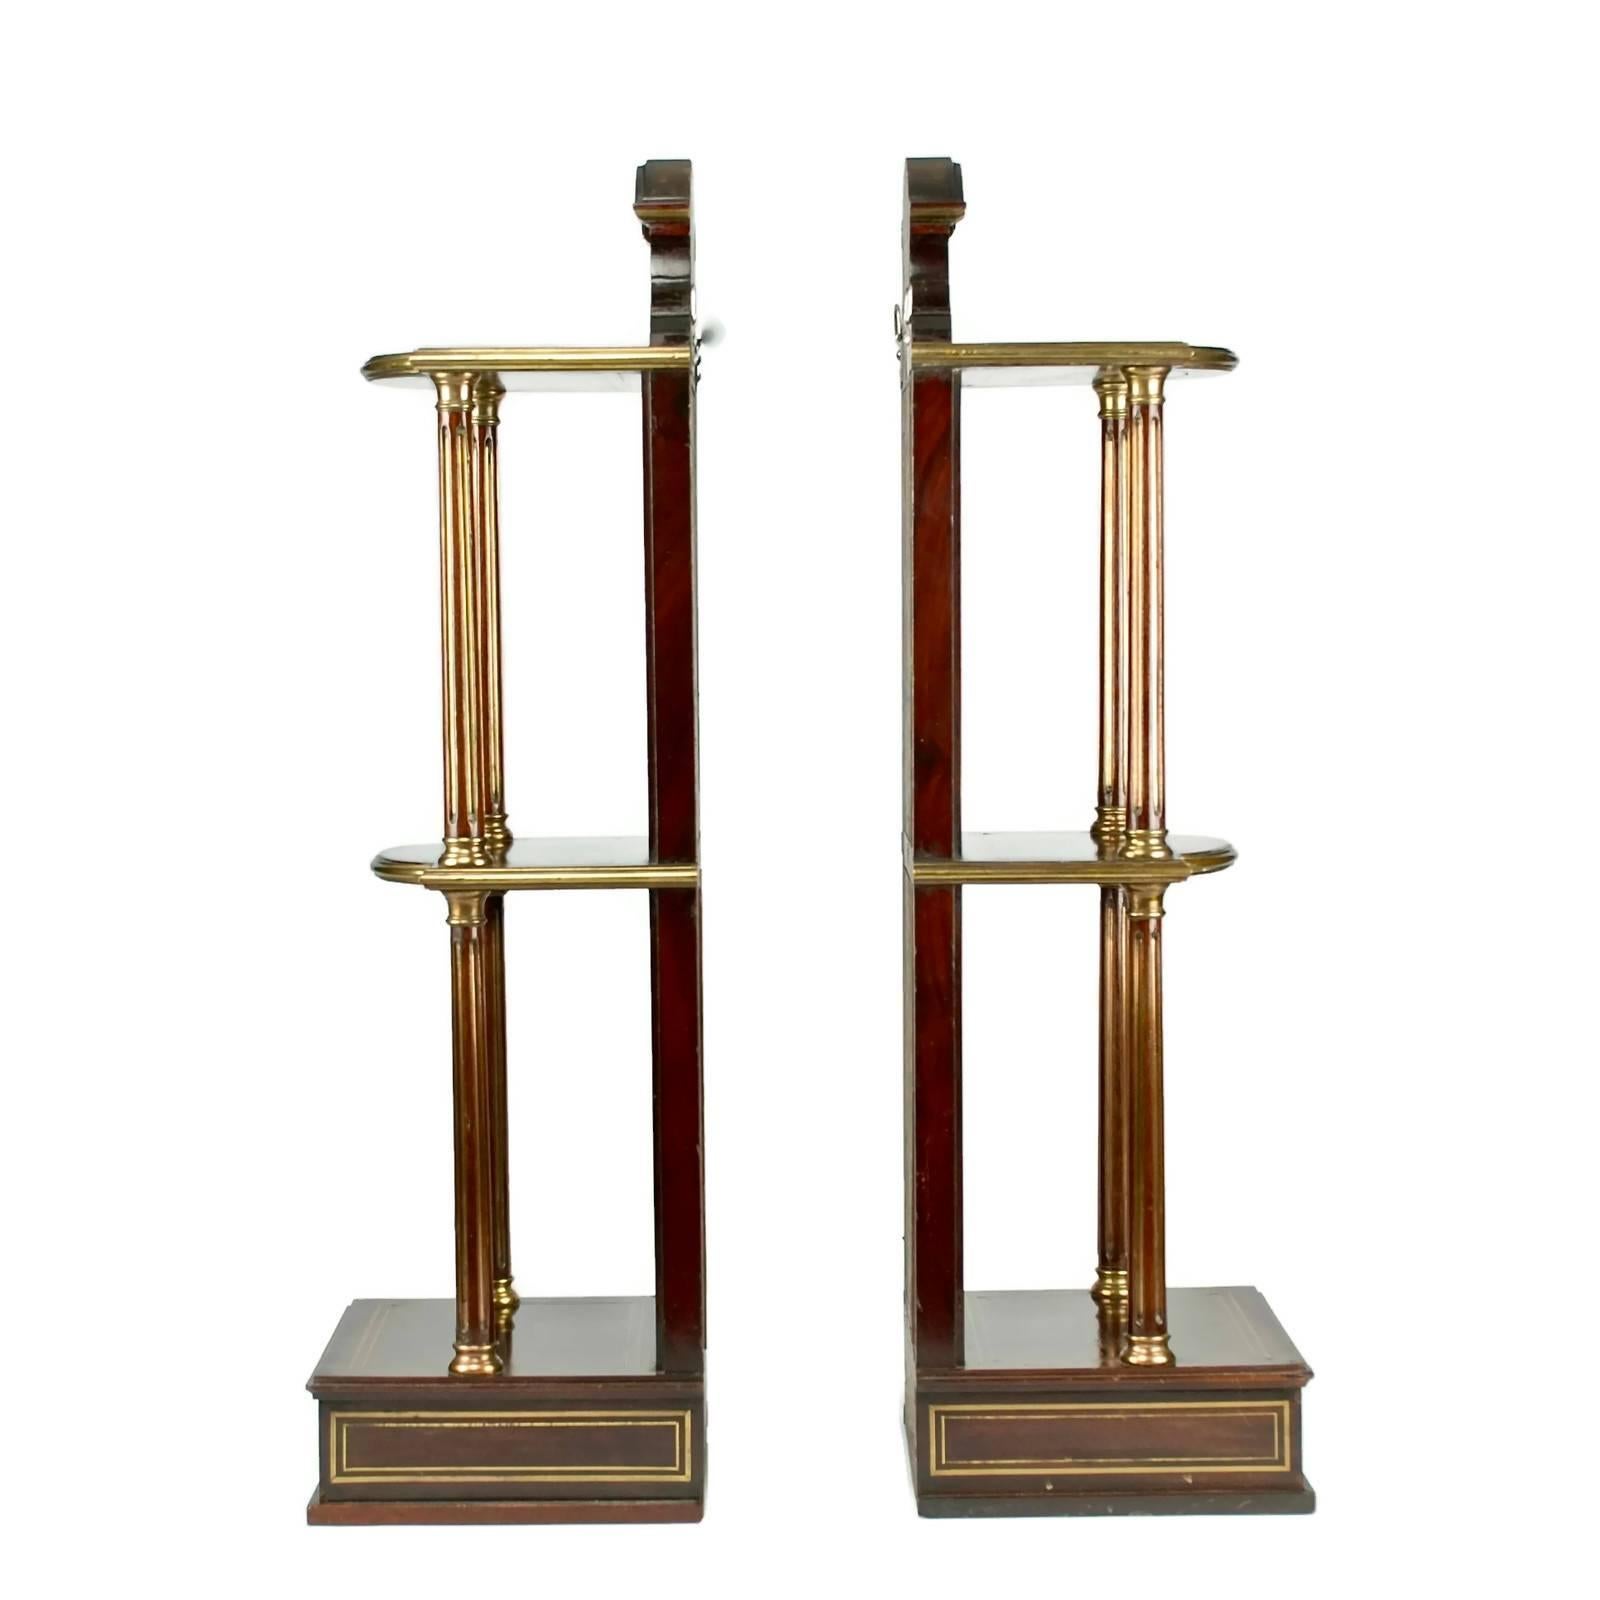 This handsome pair of French Empire mahogany wall shelves feature beveled mirrored backs and fluted columns. The shelves are trimmed with inlaid brass accents and have a single drawer at the bottom. The pair are fitted with hooks at the back for